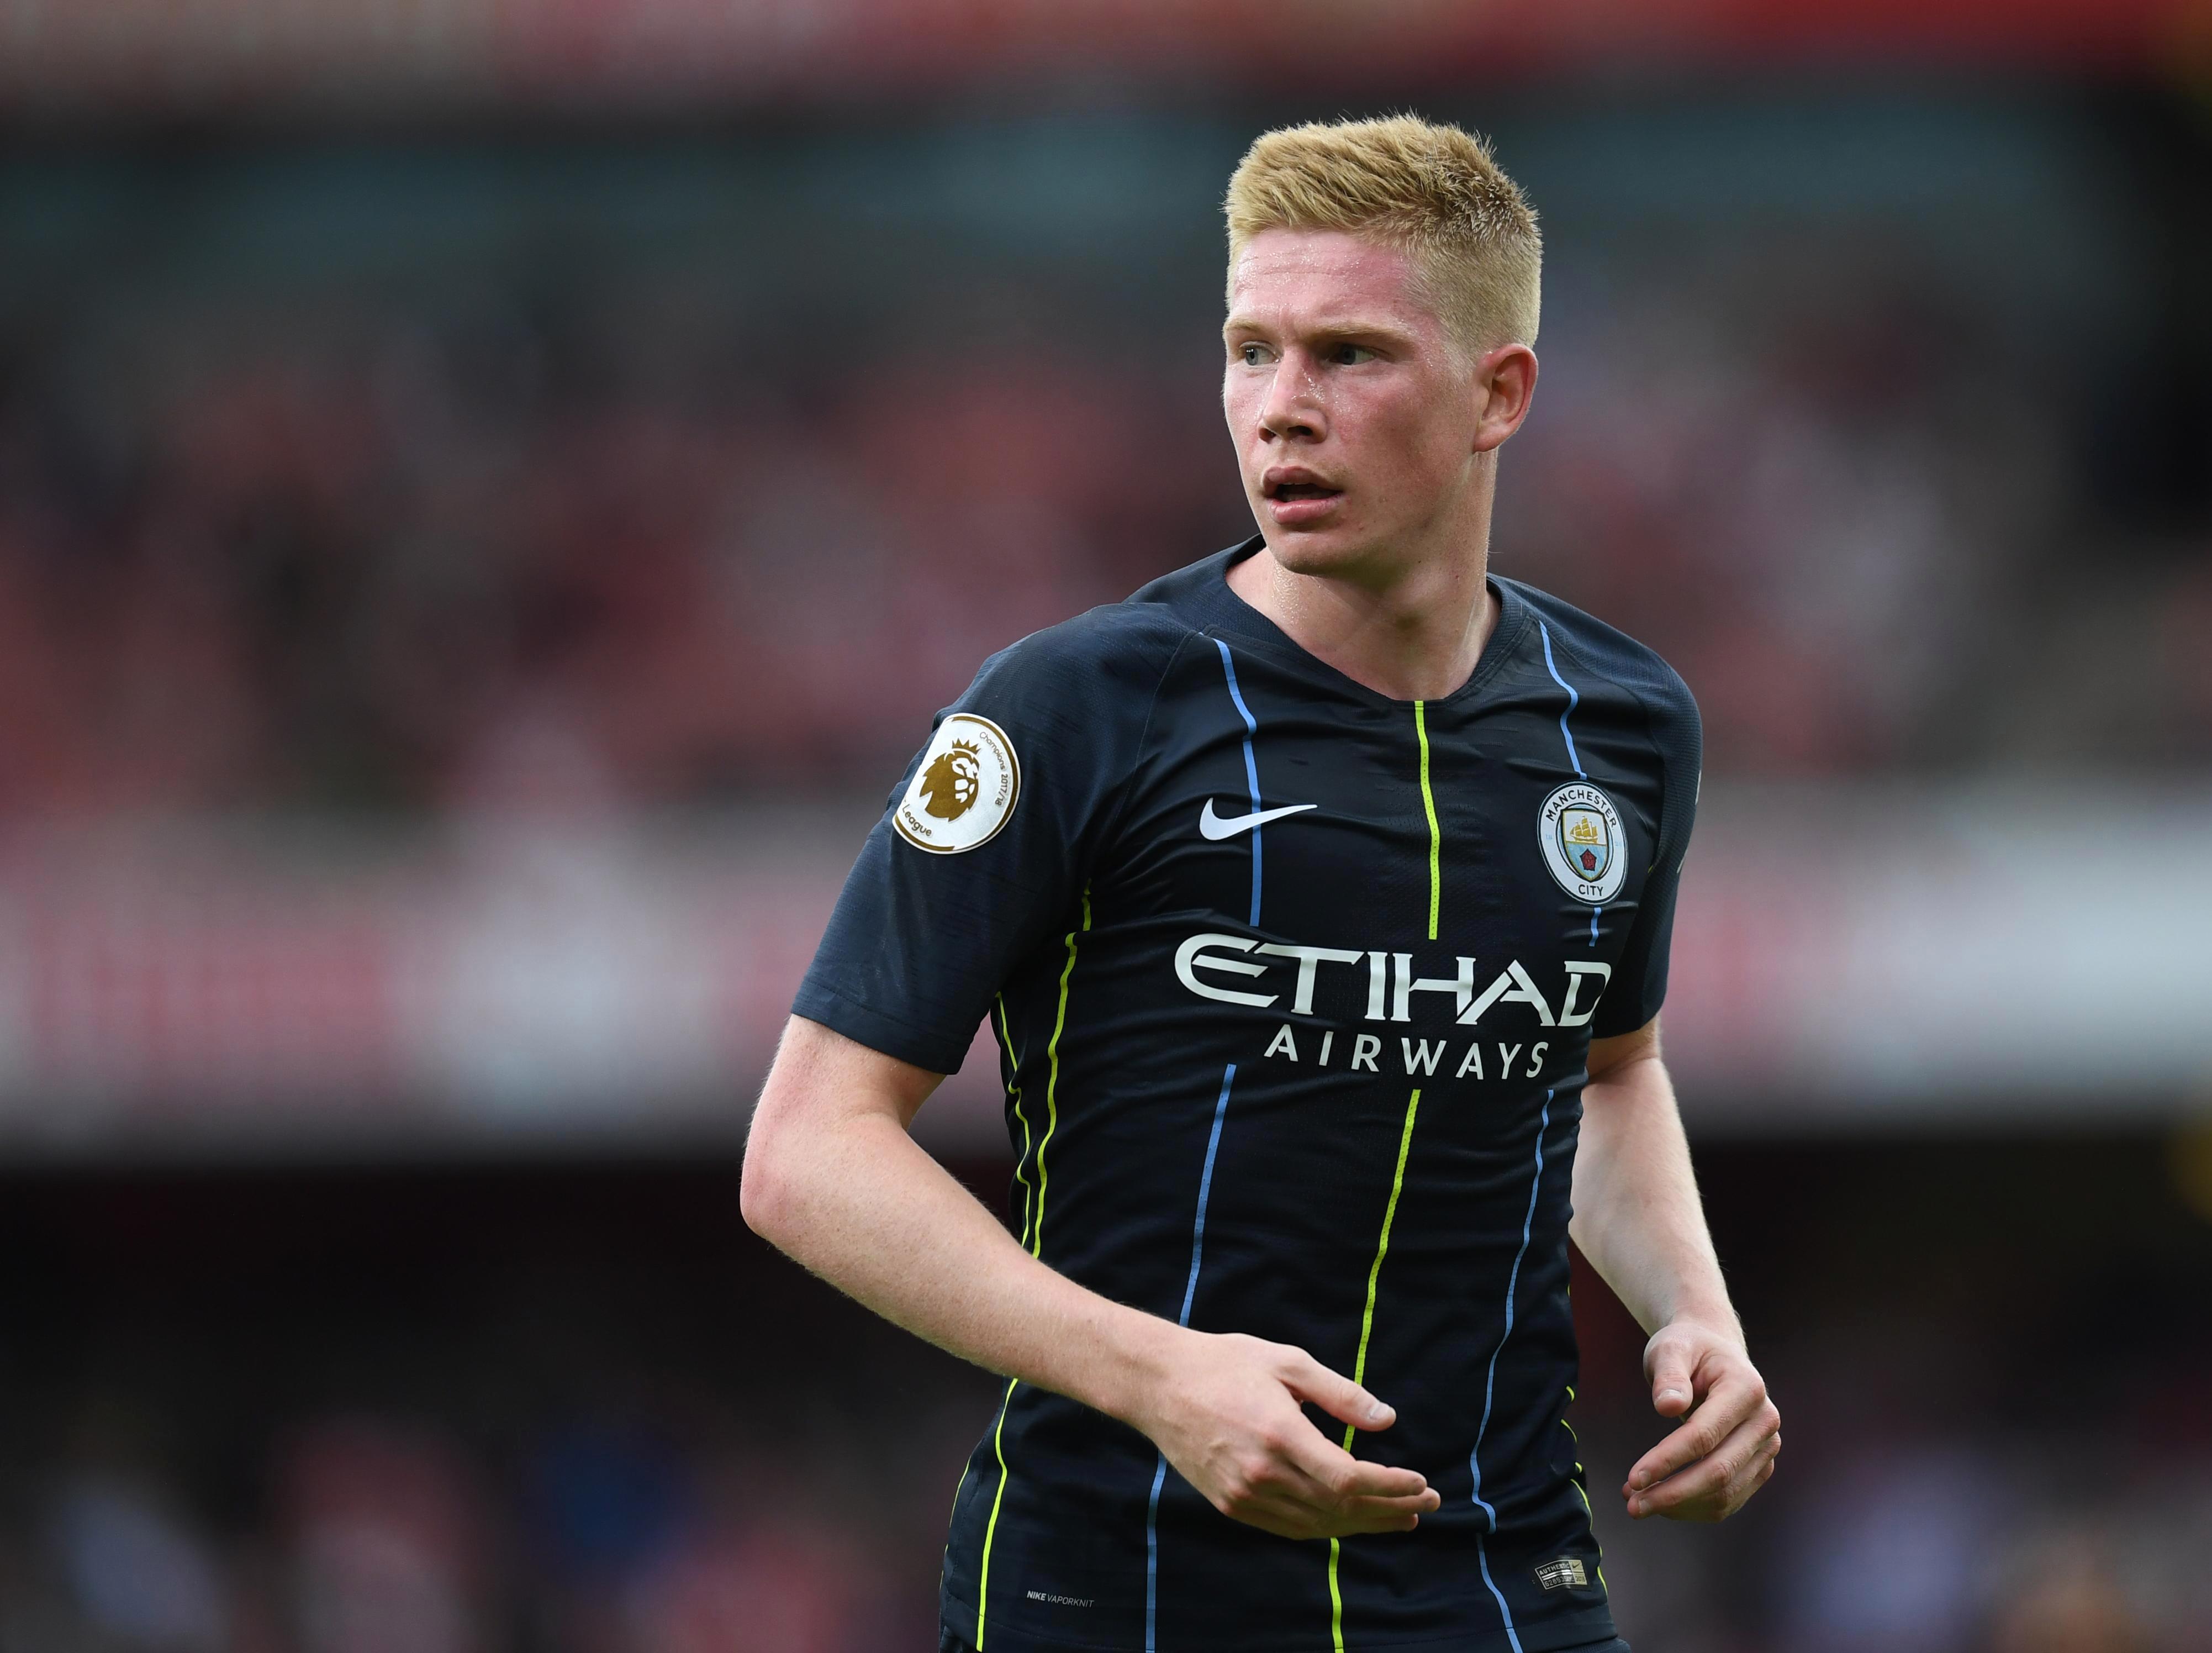 Manchester City star Kevin De Bruyne facing up to three months out after suffering knee injury in training